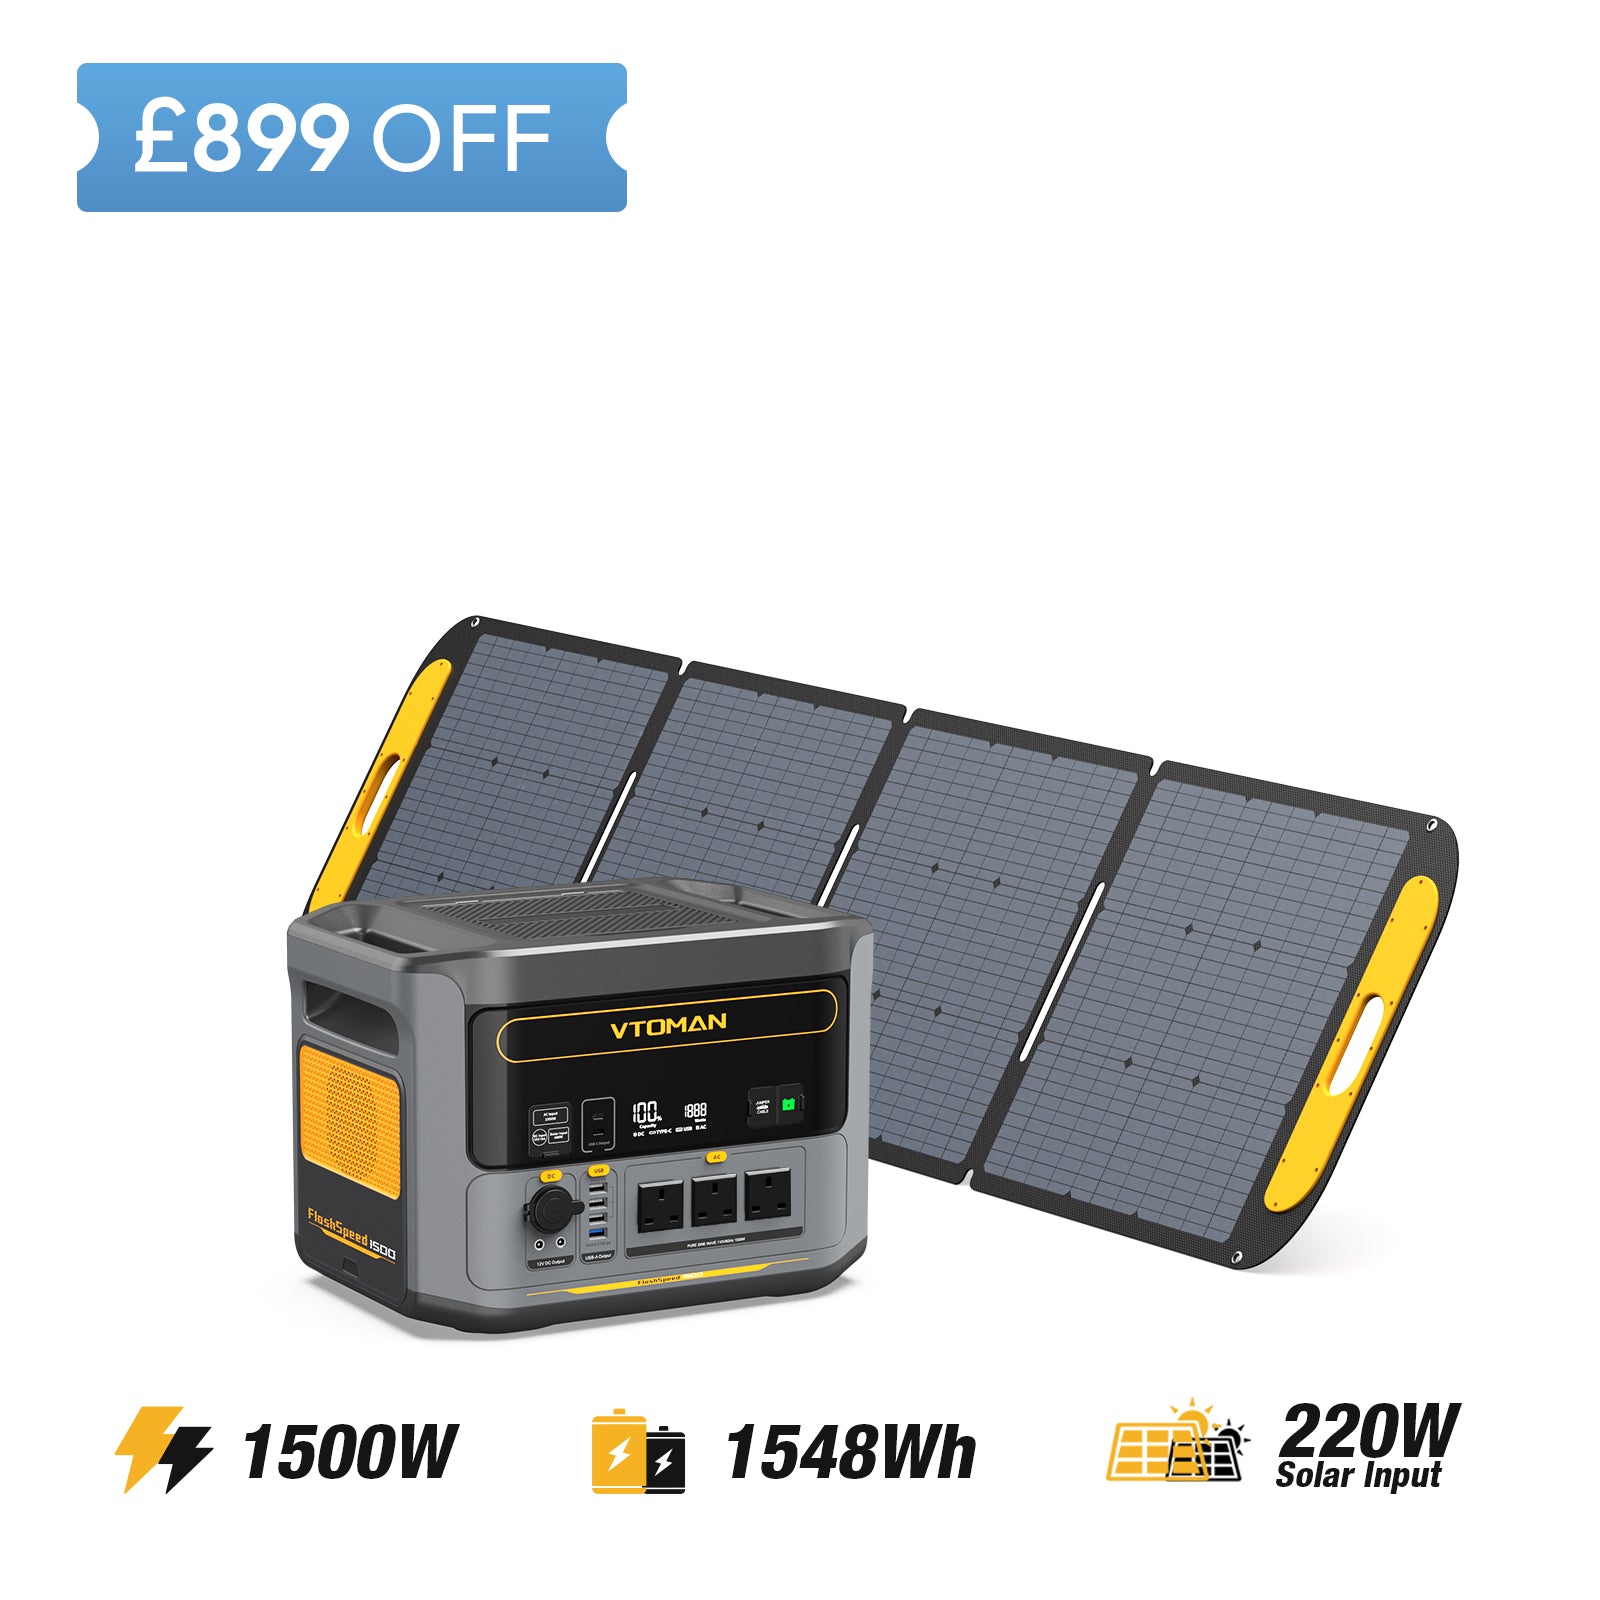 FlashSpeed 1500 and 220W solar panel save £899 in summer sale